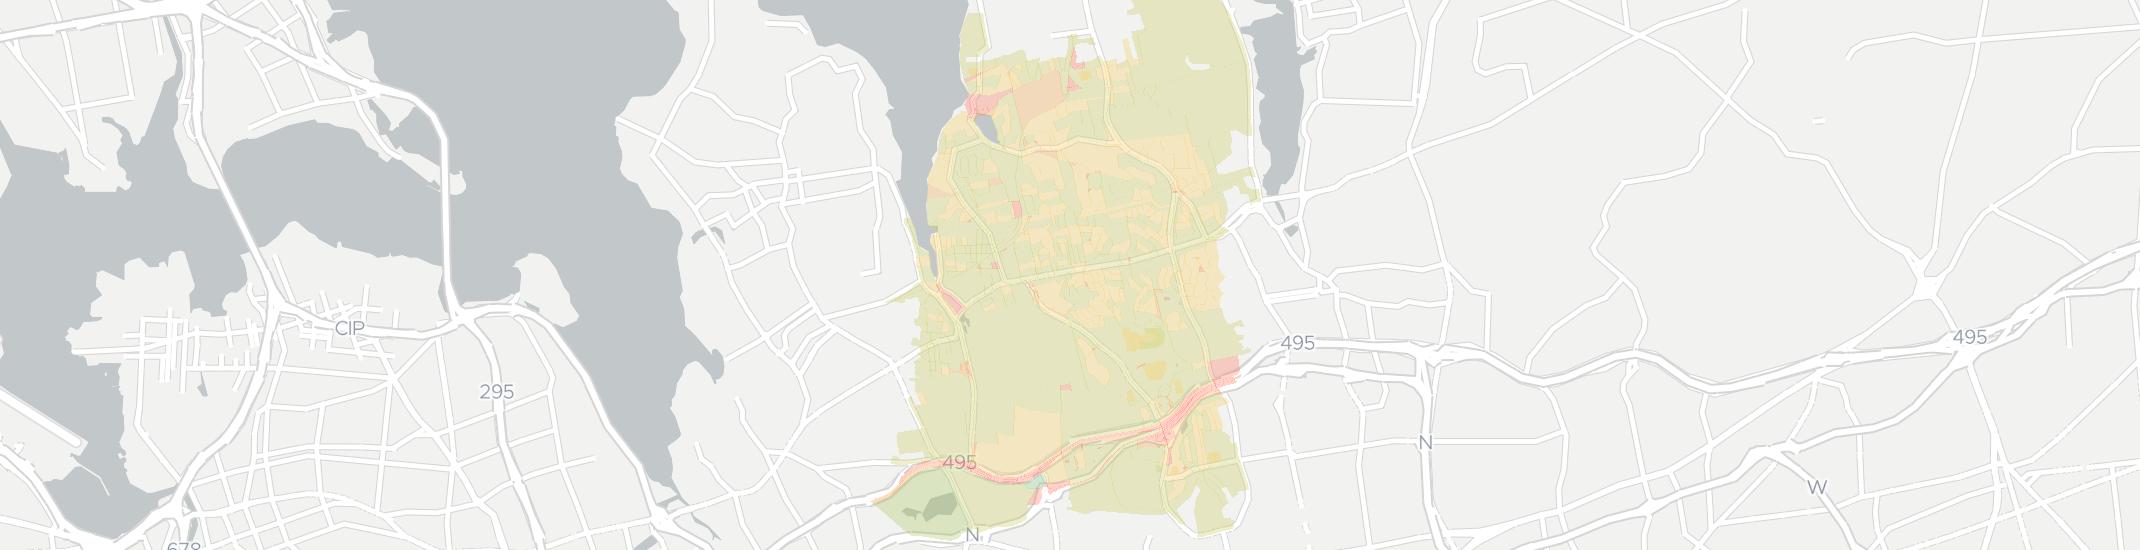 Manhasset Internet Competition Map. Click for interactive map.